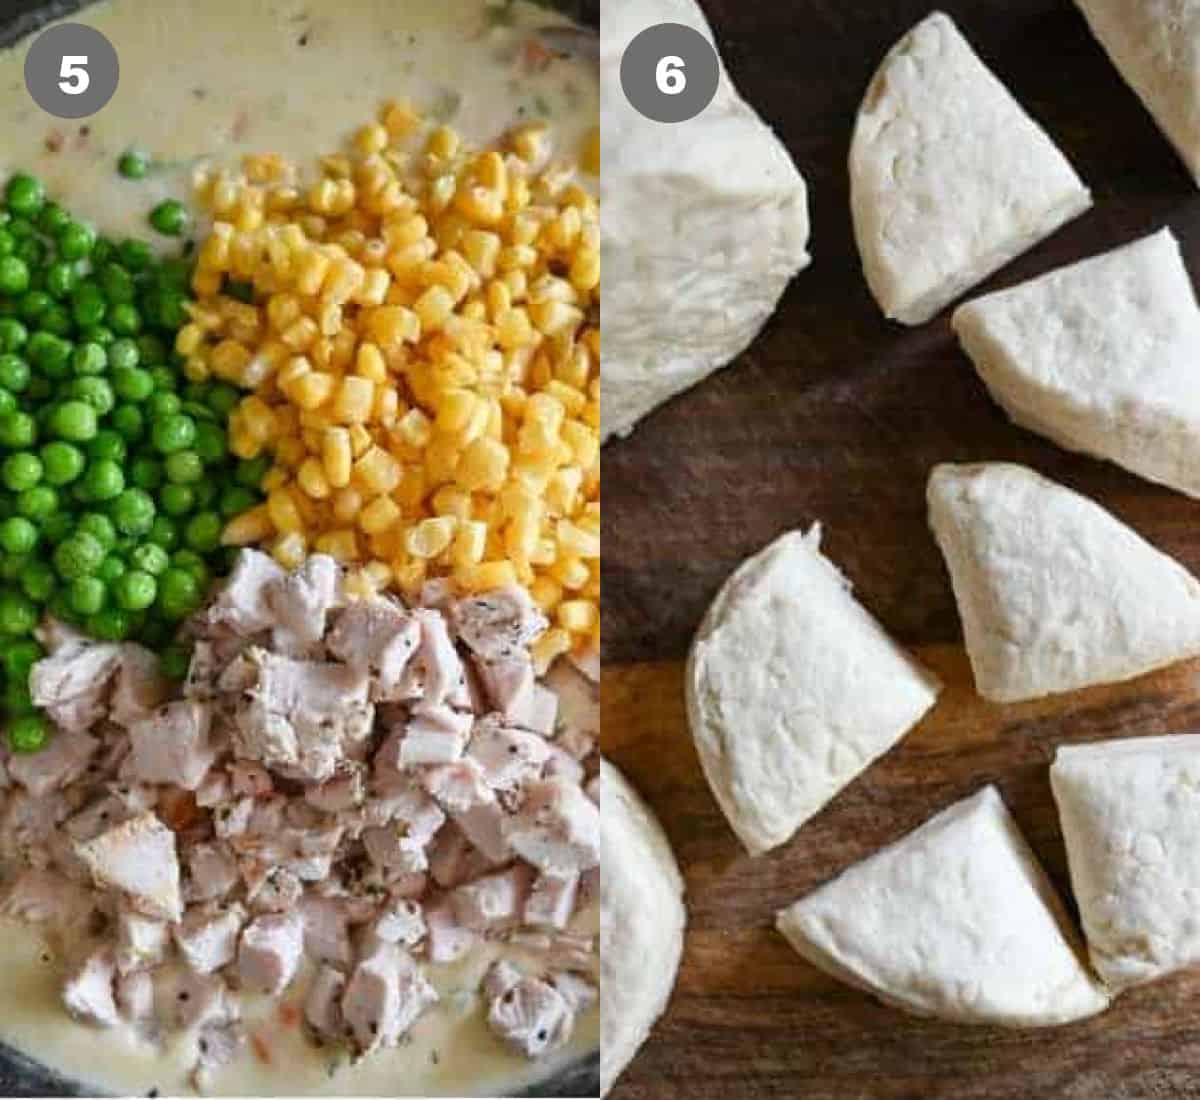 Chicken, peas and corn added to the skillet and biscuits cut into quaters.